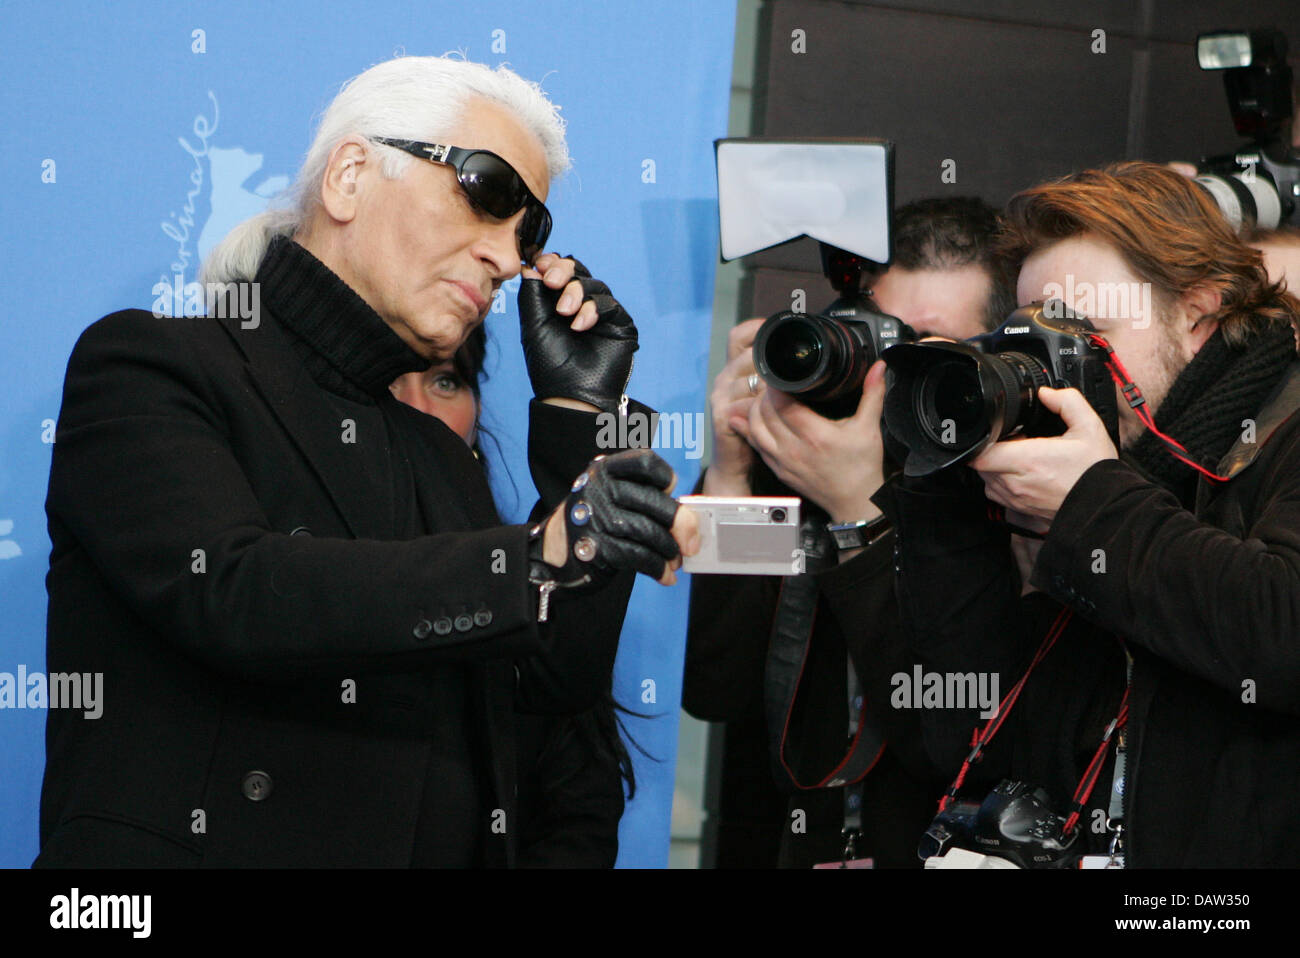 German fashion designer Karl Lagerfeld is pictured holding his camera  during a photo call for the film 'Lagerfeld Confidential' at the 57th  Berlinale Film Festival in Berlin, Germany, Saturday, 10 February 2007.